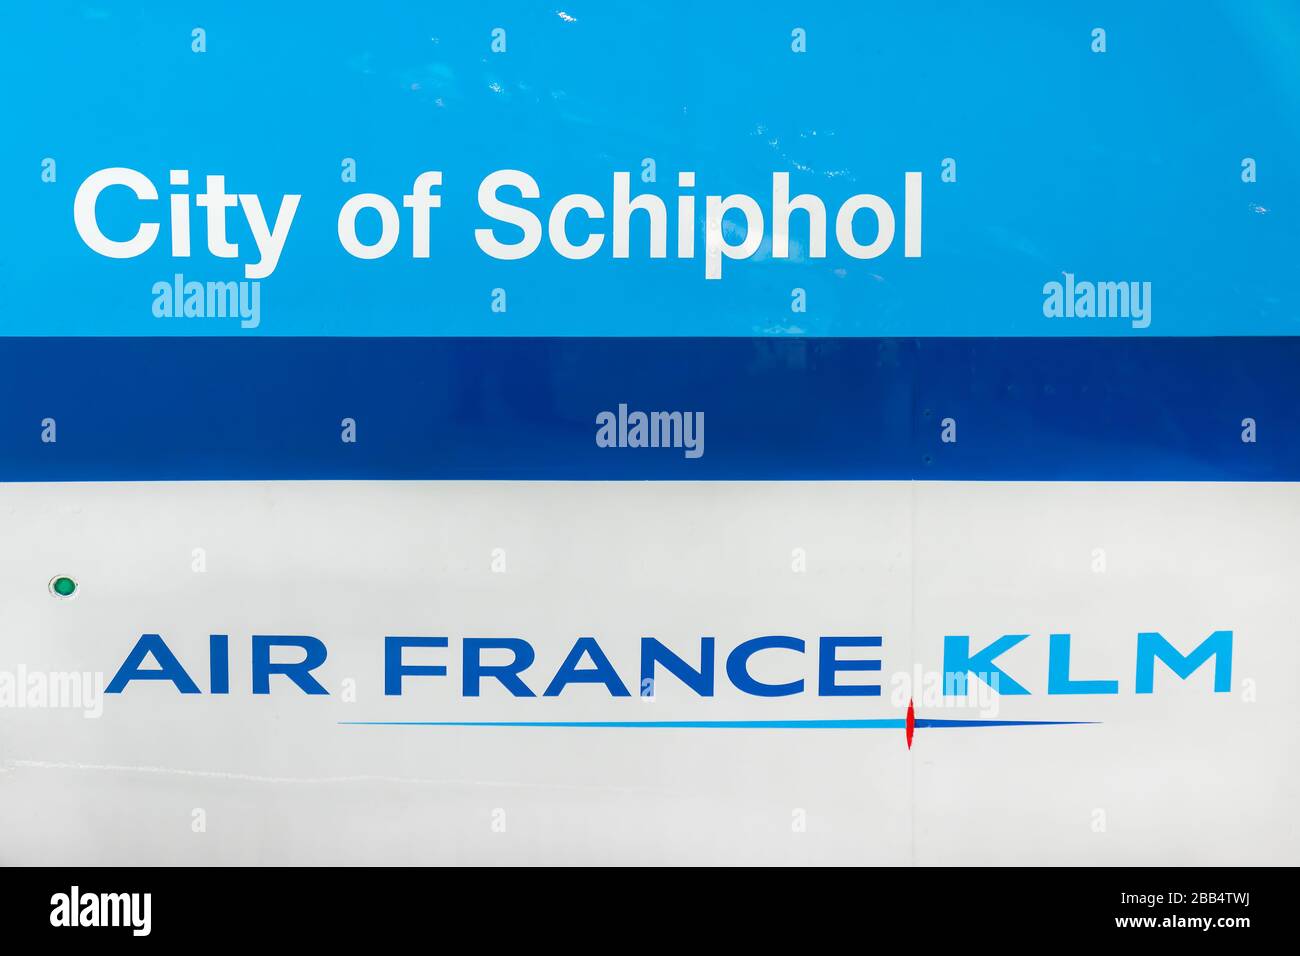 Schiphol, The Netherlands - January 16, 2020:  Side view of a Dutch airplane with the text 'City of Schiphol - Air France KLM' on Schiphol Airport, Th Stock Photo